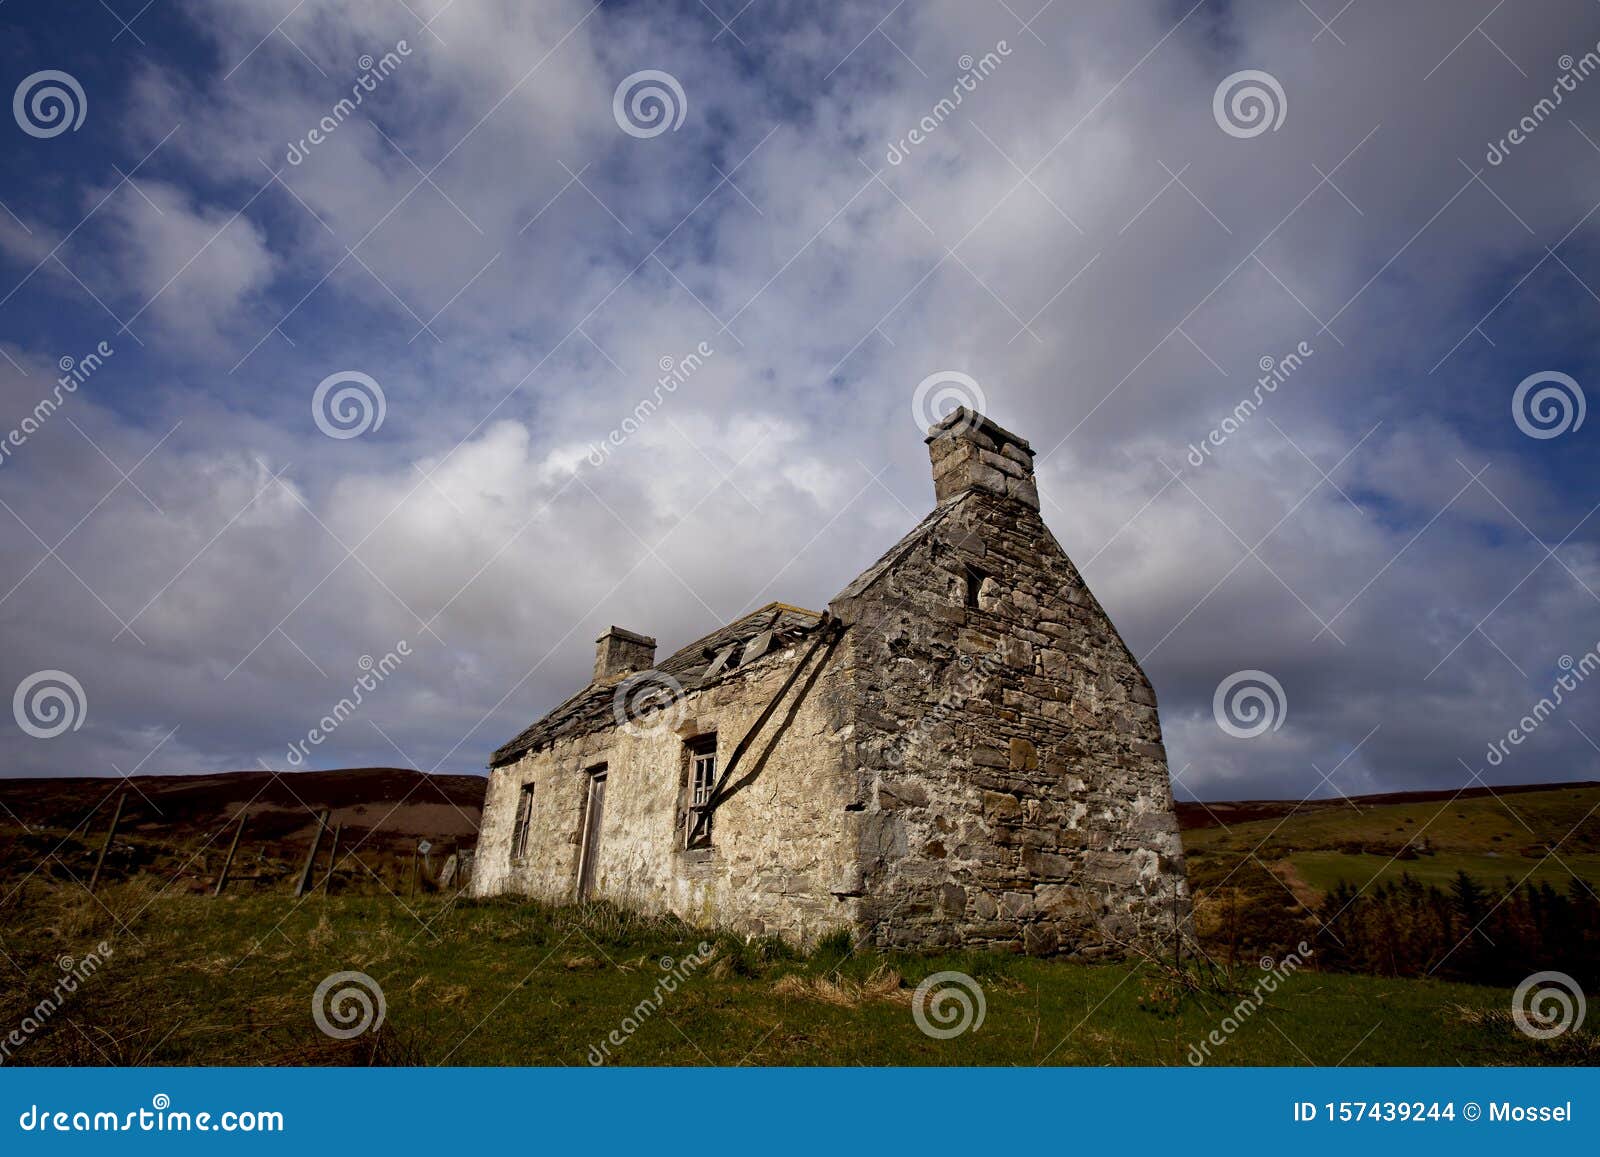 a desolated crofter`s house in scotland